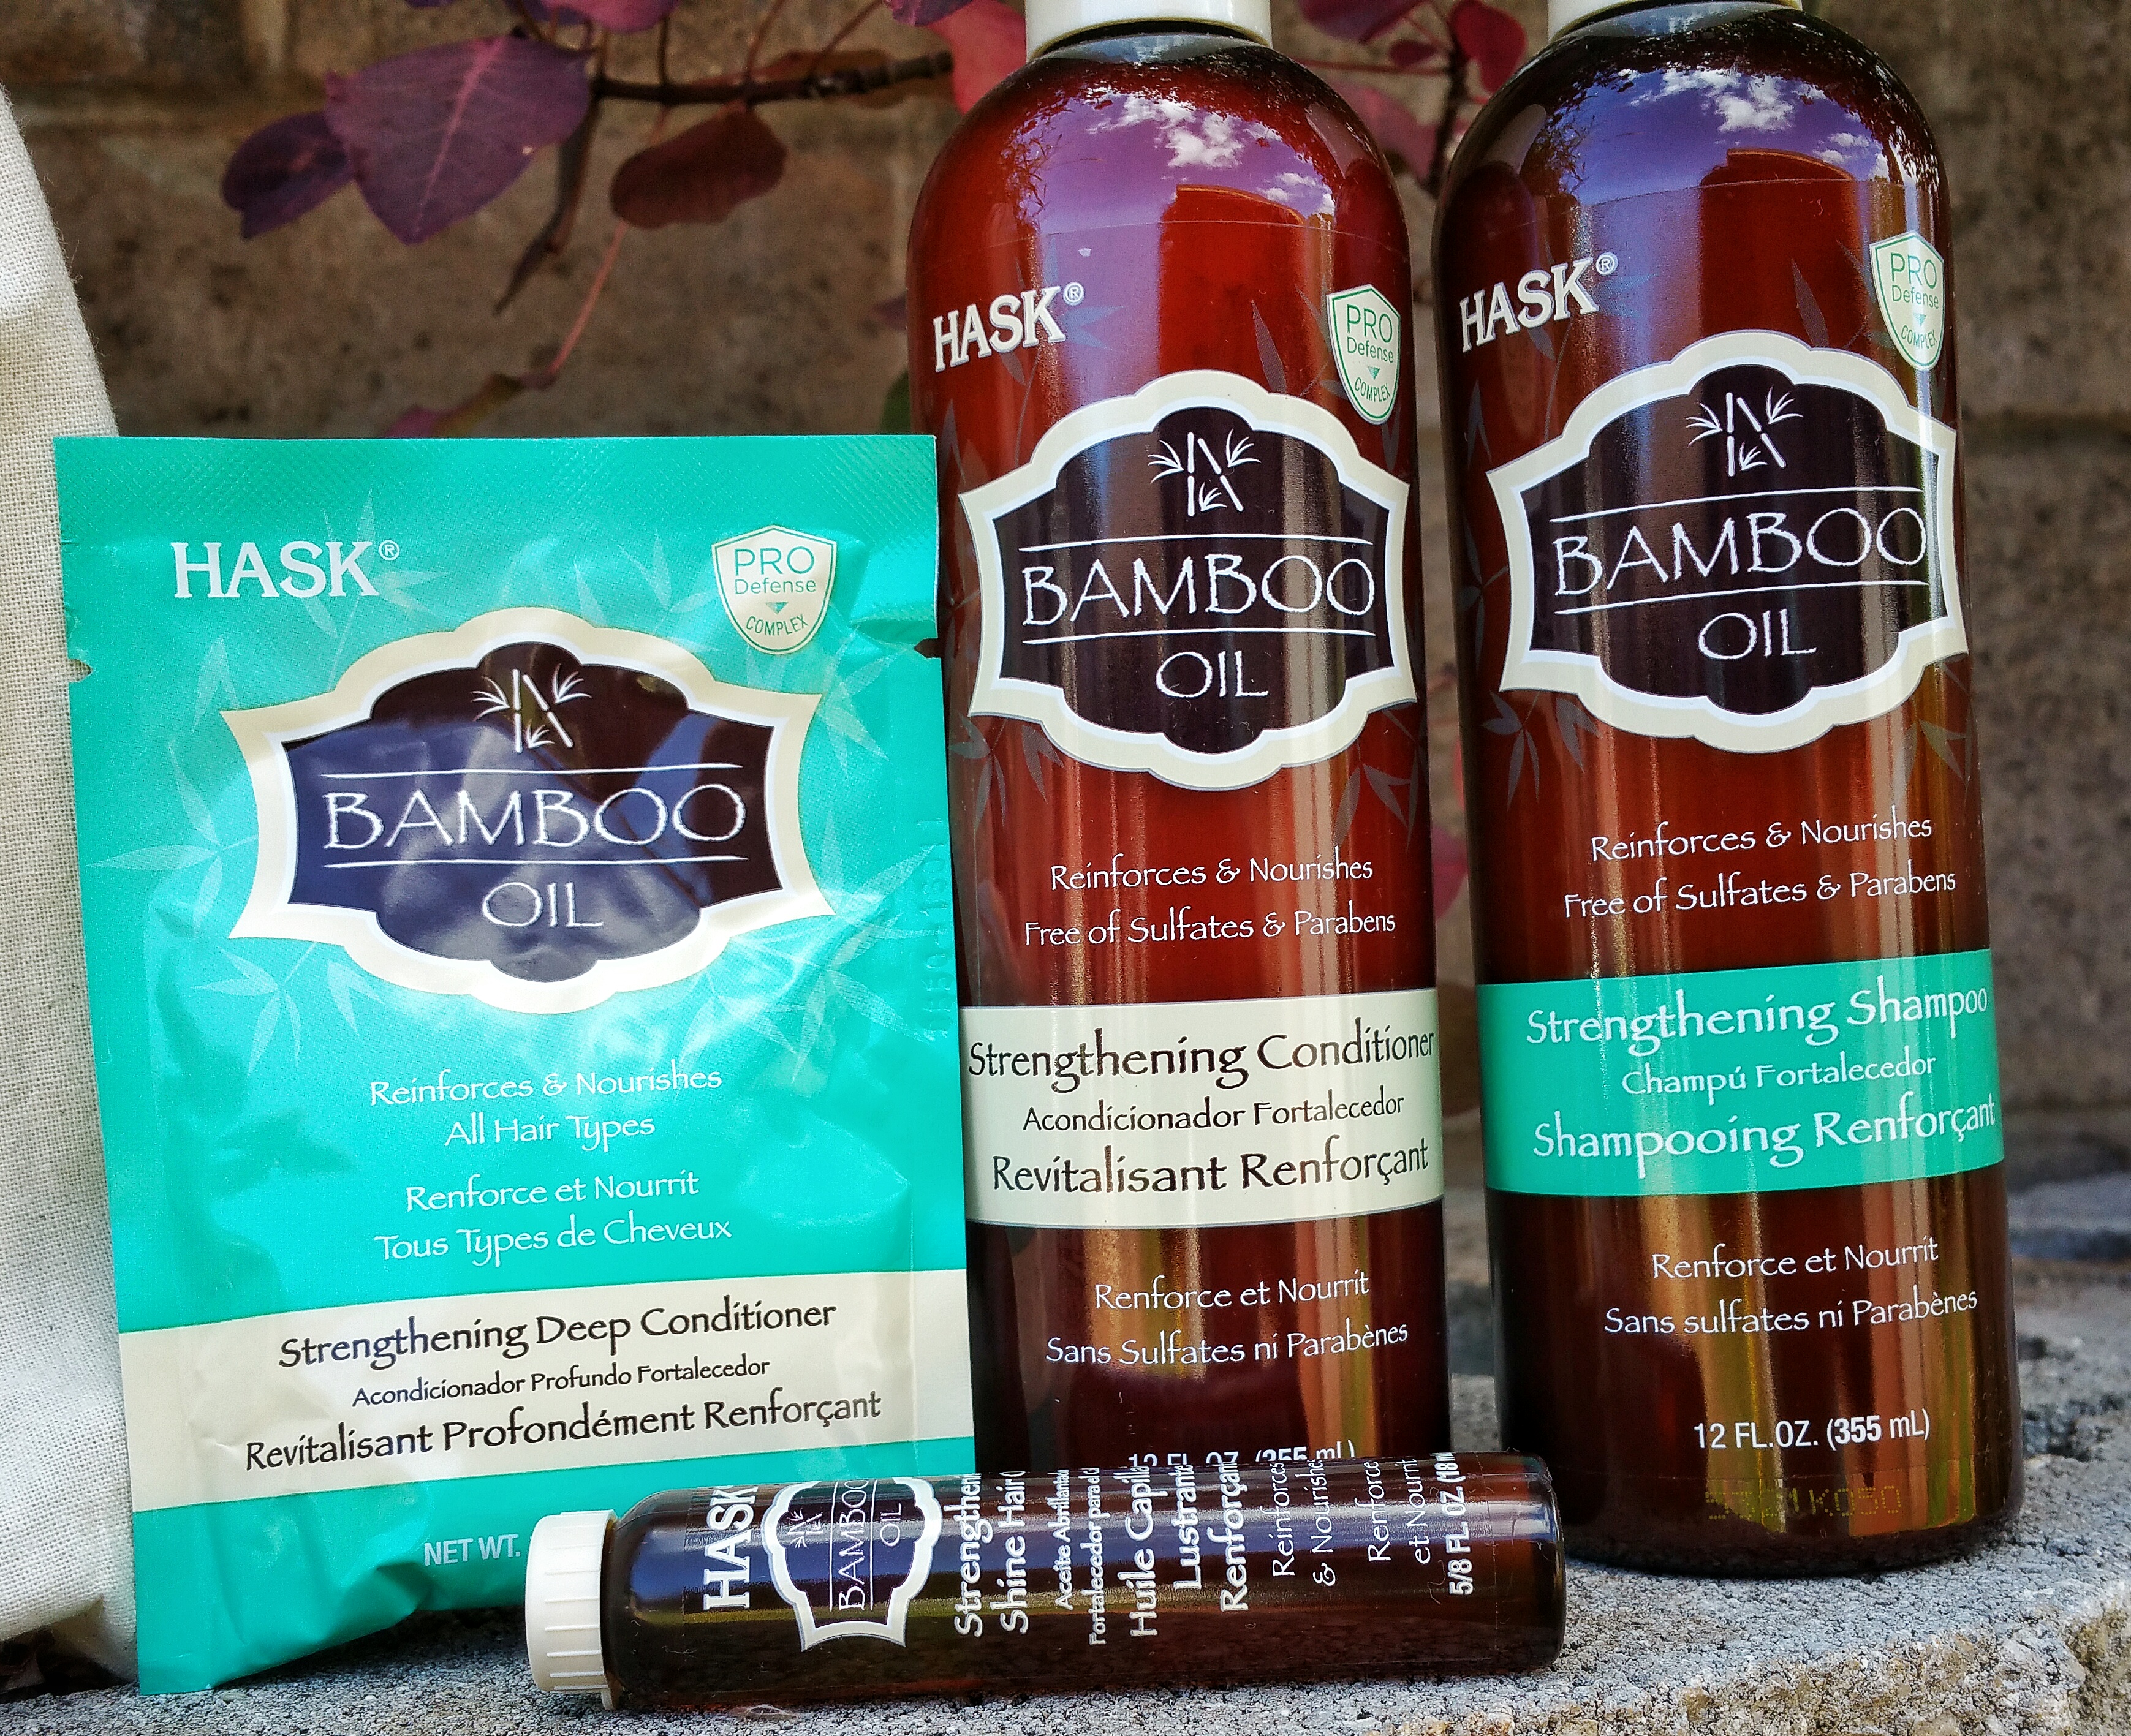 HASK, Hask hair care, HASK bamboo oil collection, hair, beauty, beauty review, hair product, curly hair, repair damage hair, strengthen hair, hair care review, hair product review, natural hair, long hair,